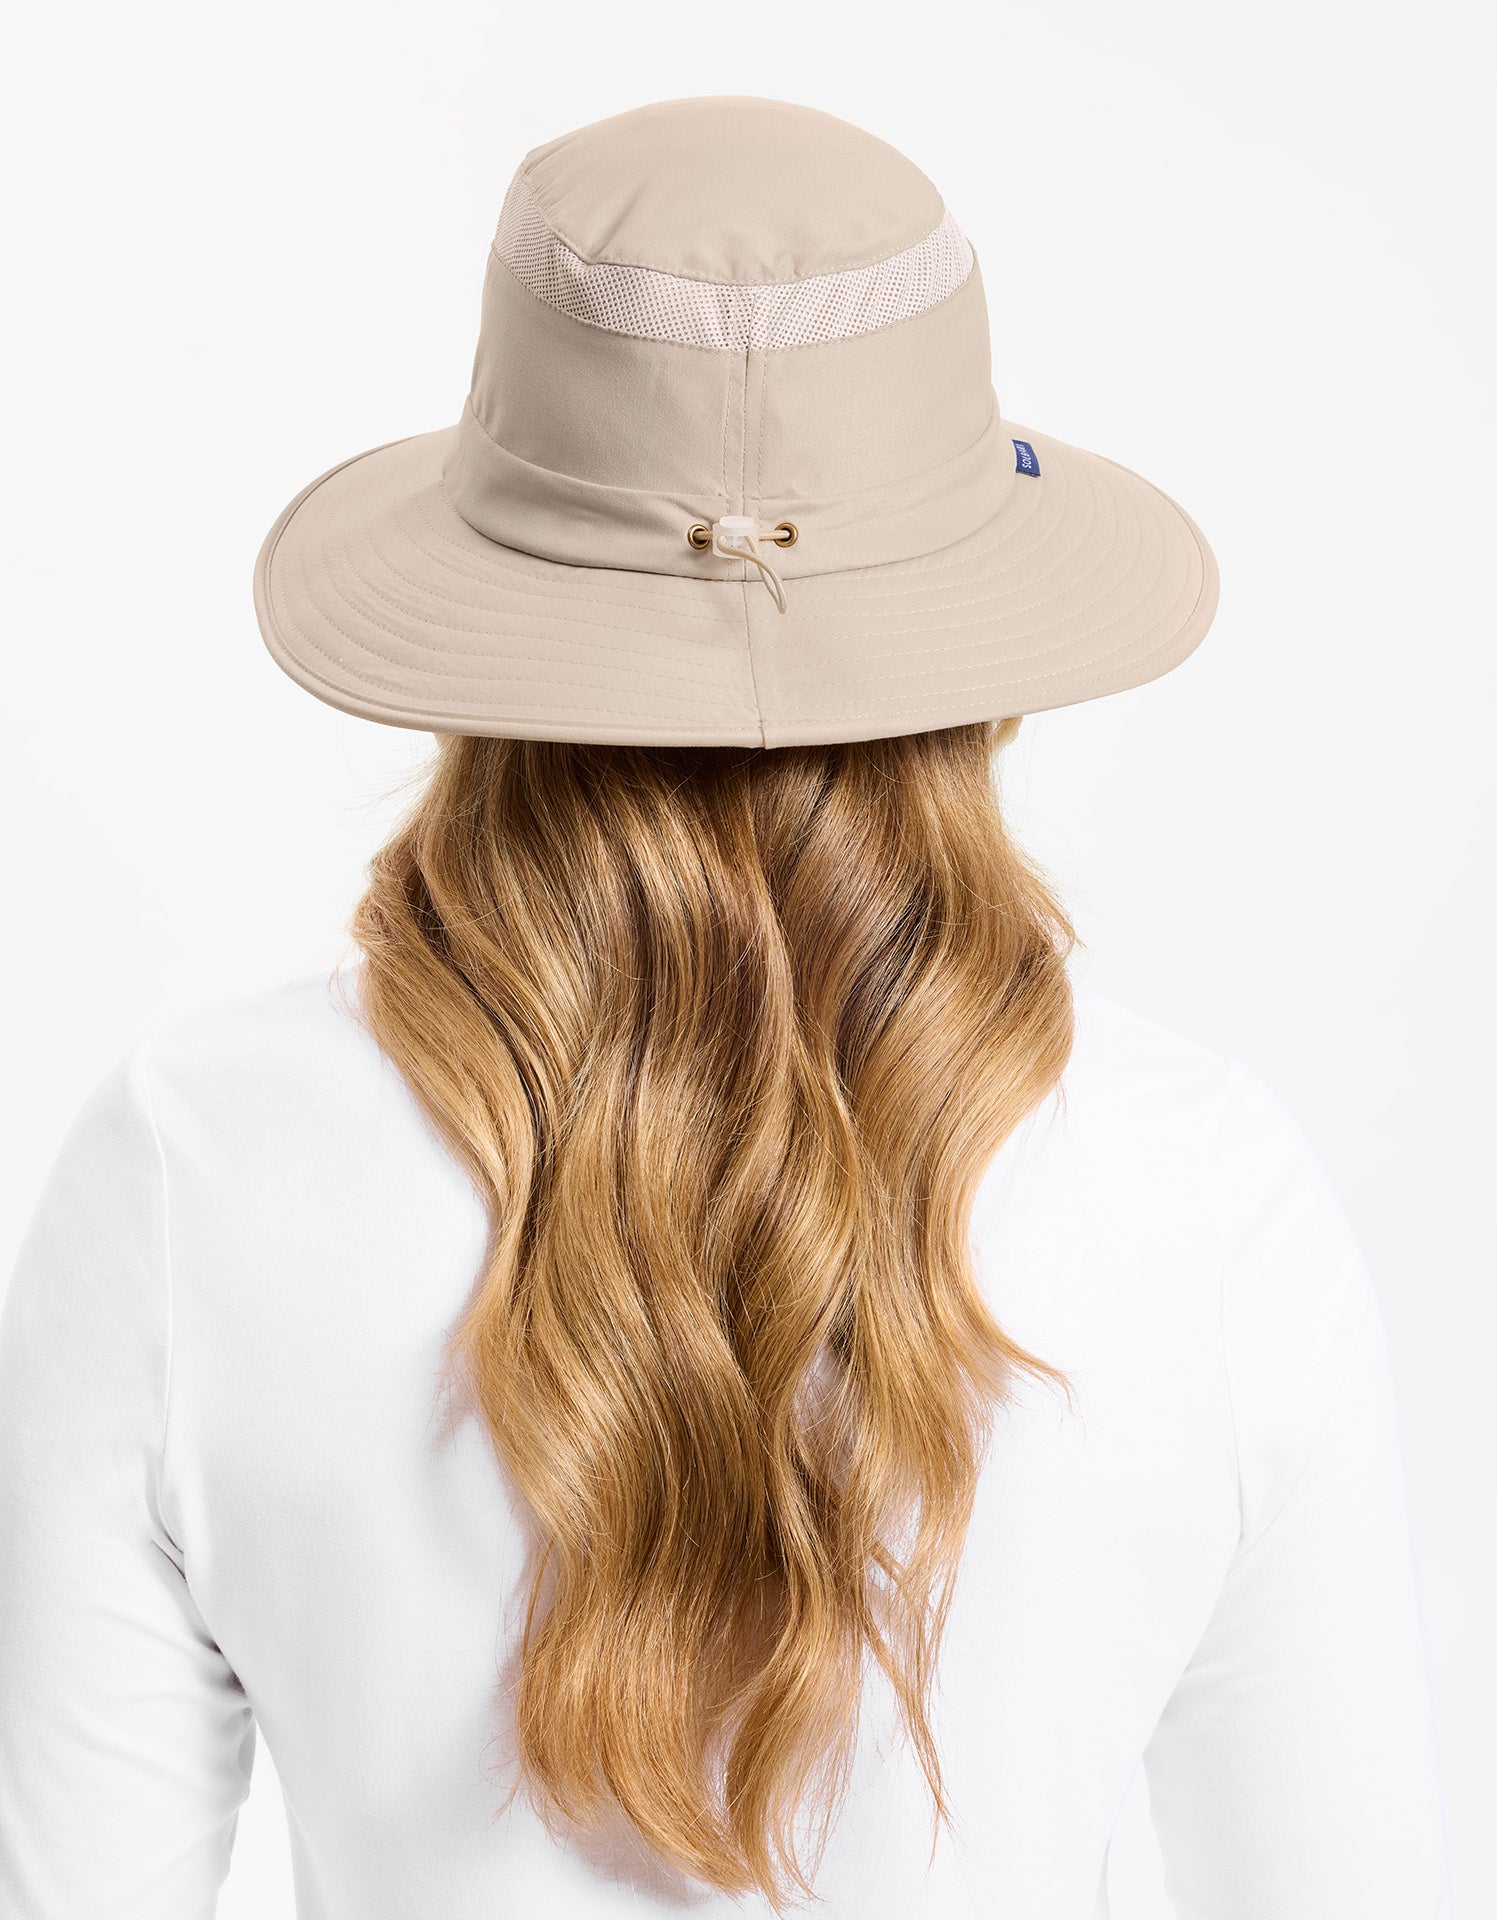 Everyday Broad Brim Sun Hat with Pocket for Women | UPF50+ Certified Beige